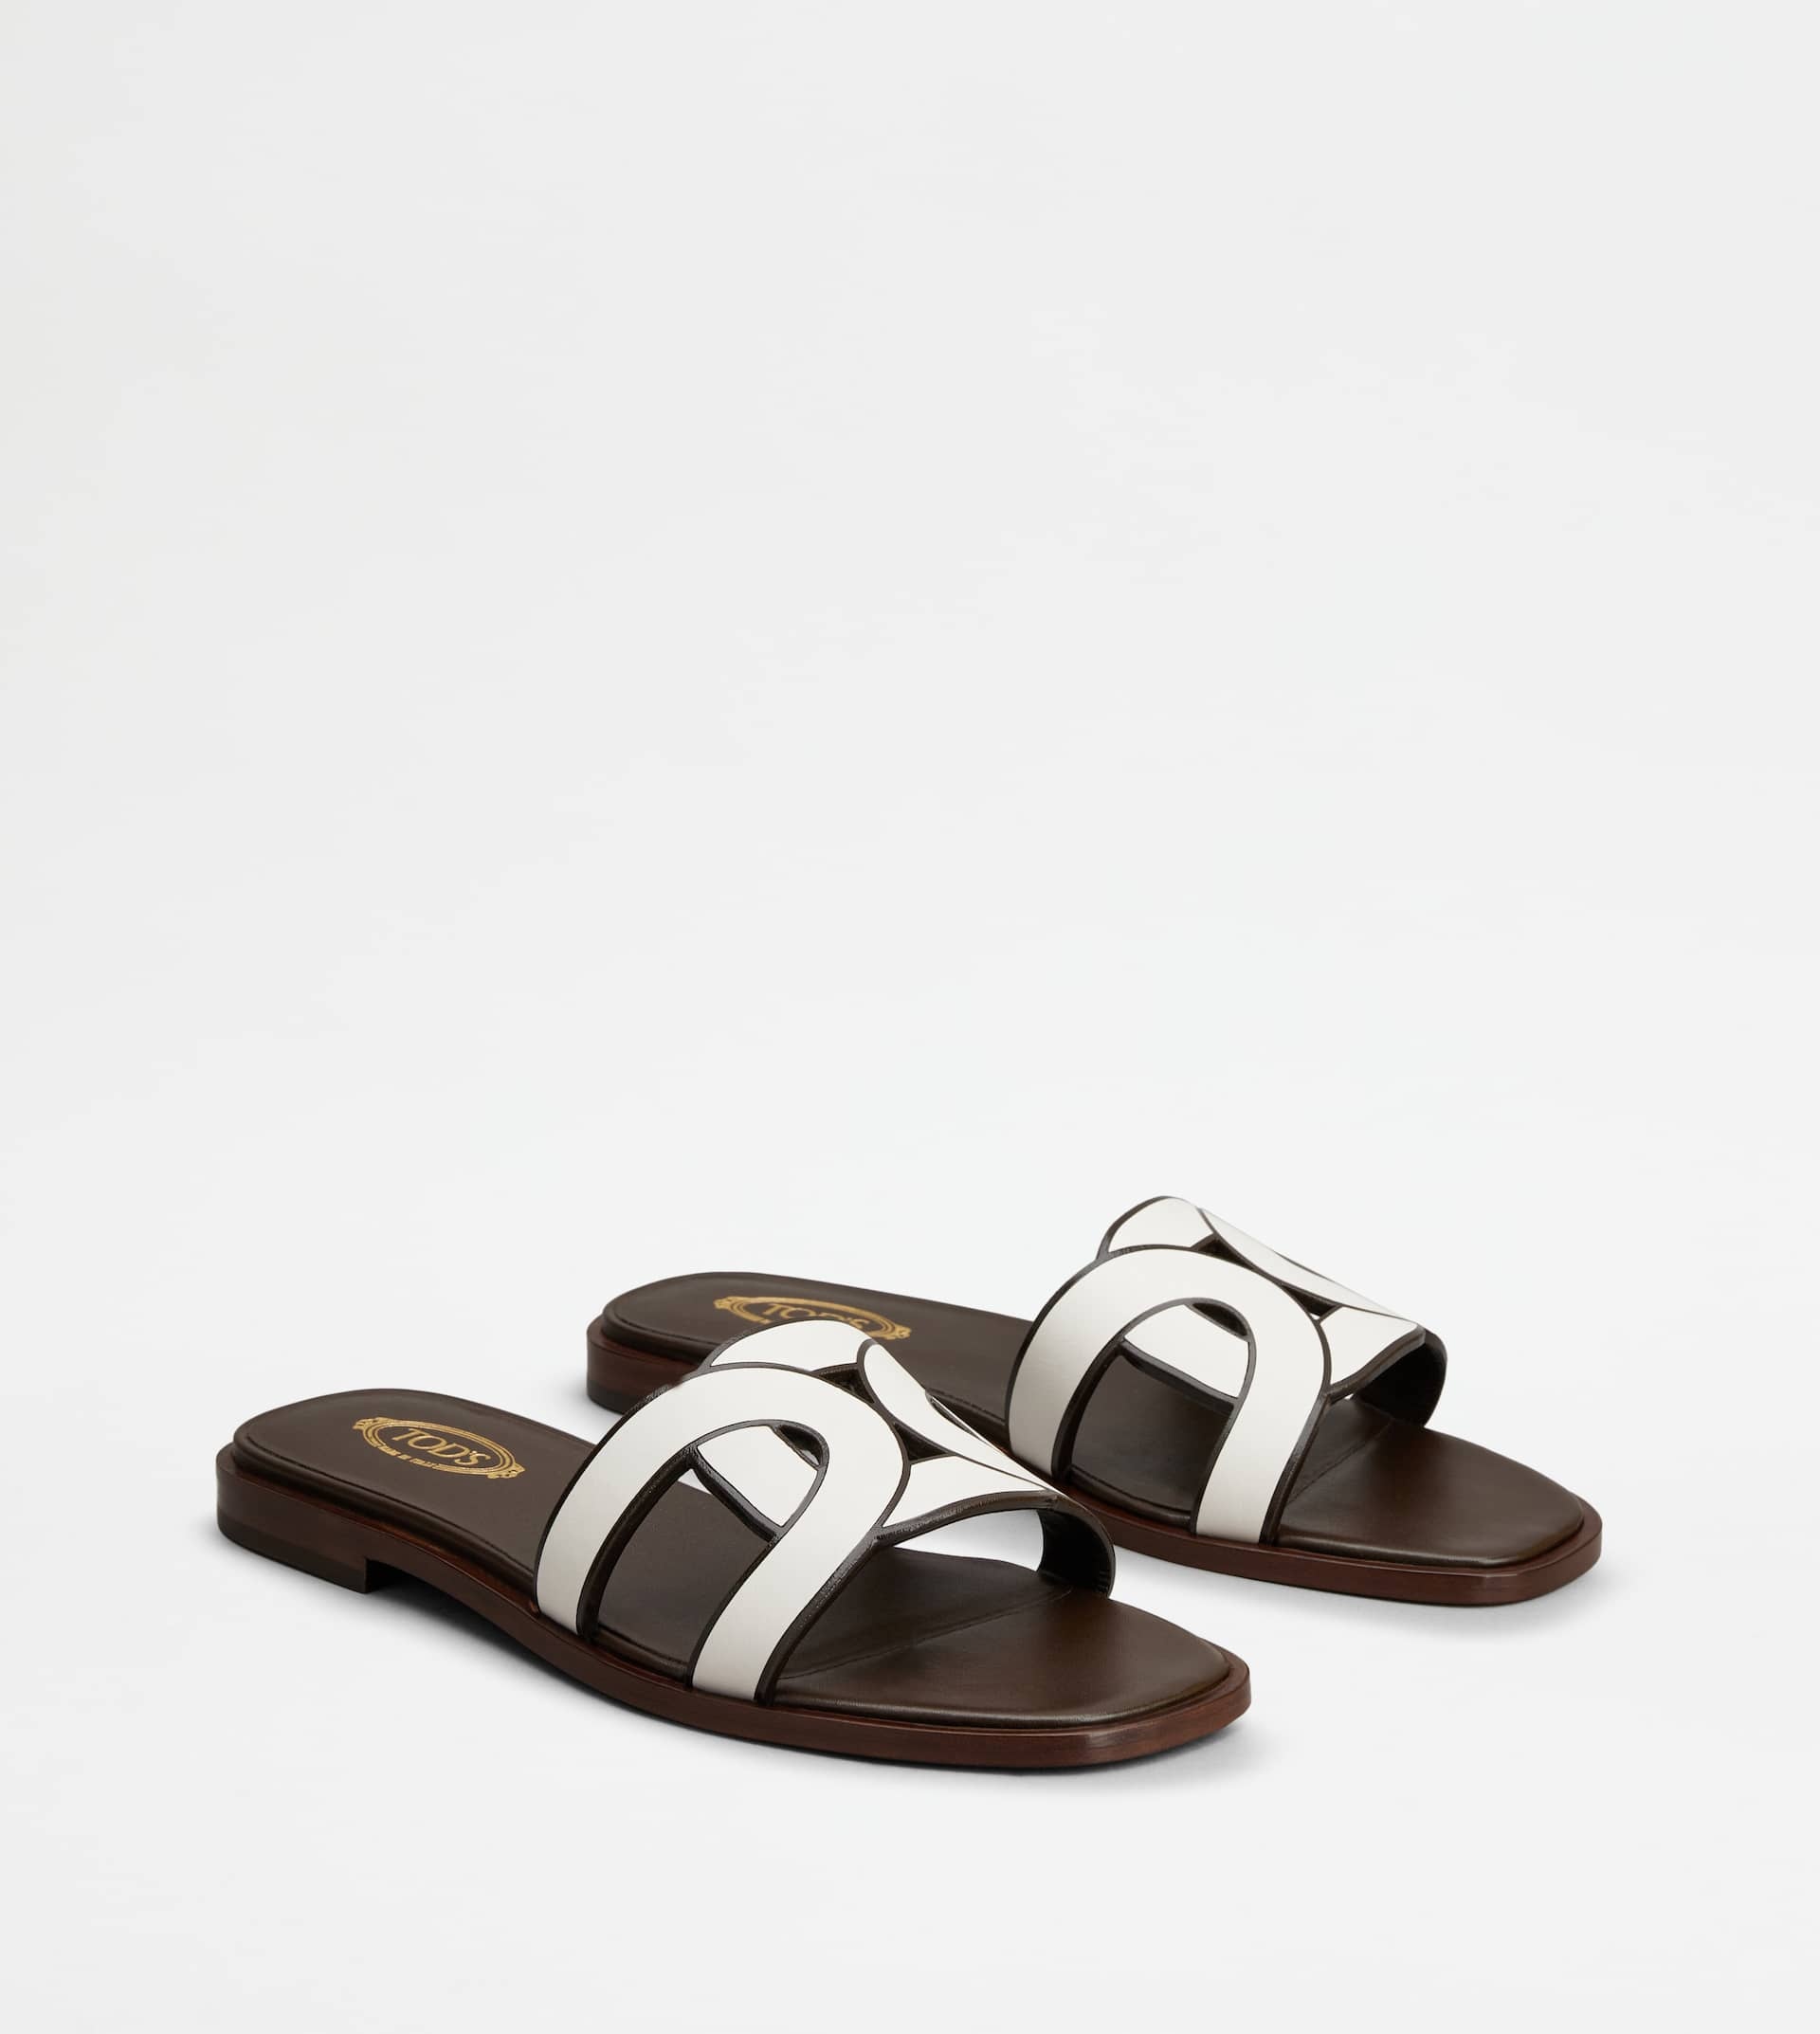 SANDALS IN LEATHER - WHITE - 3